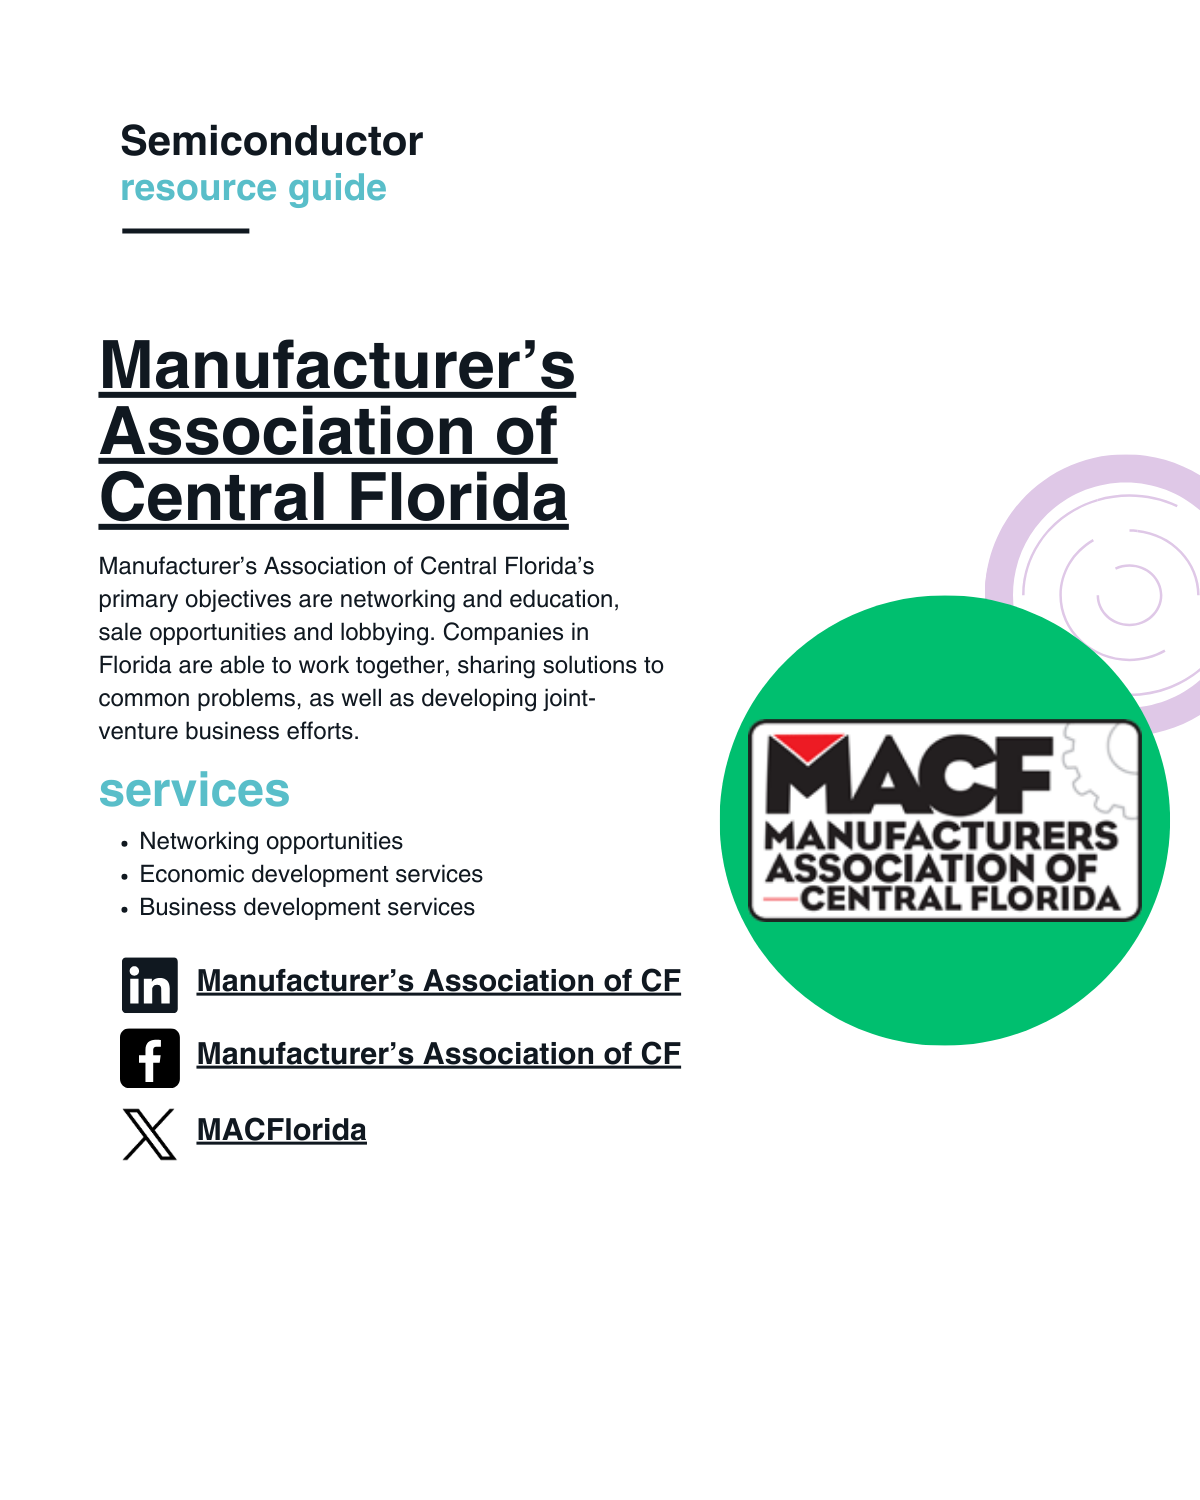 Manufacturer’s Association of Central Florida’s primary objectives are networking and education, sale opportunities and lobbying. Companies in Florida are able to work together, sharing solutions to common problems, as well as developing joint-venture business efforts.